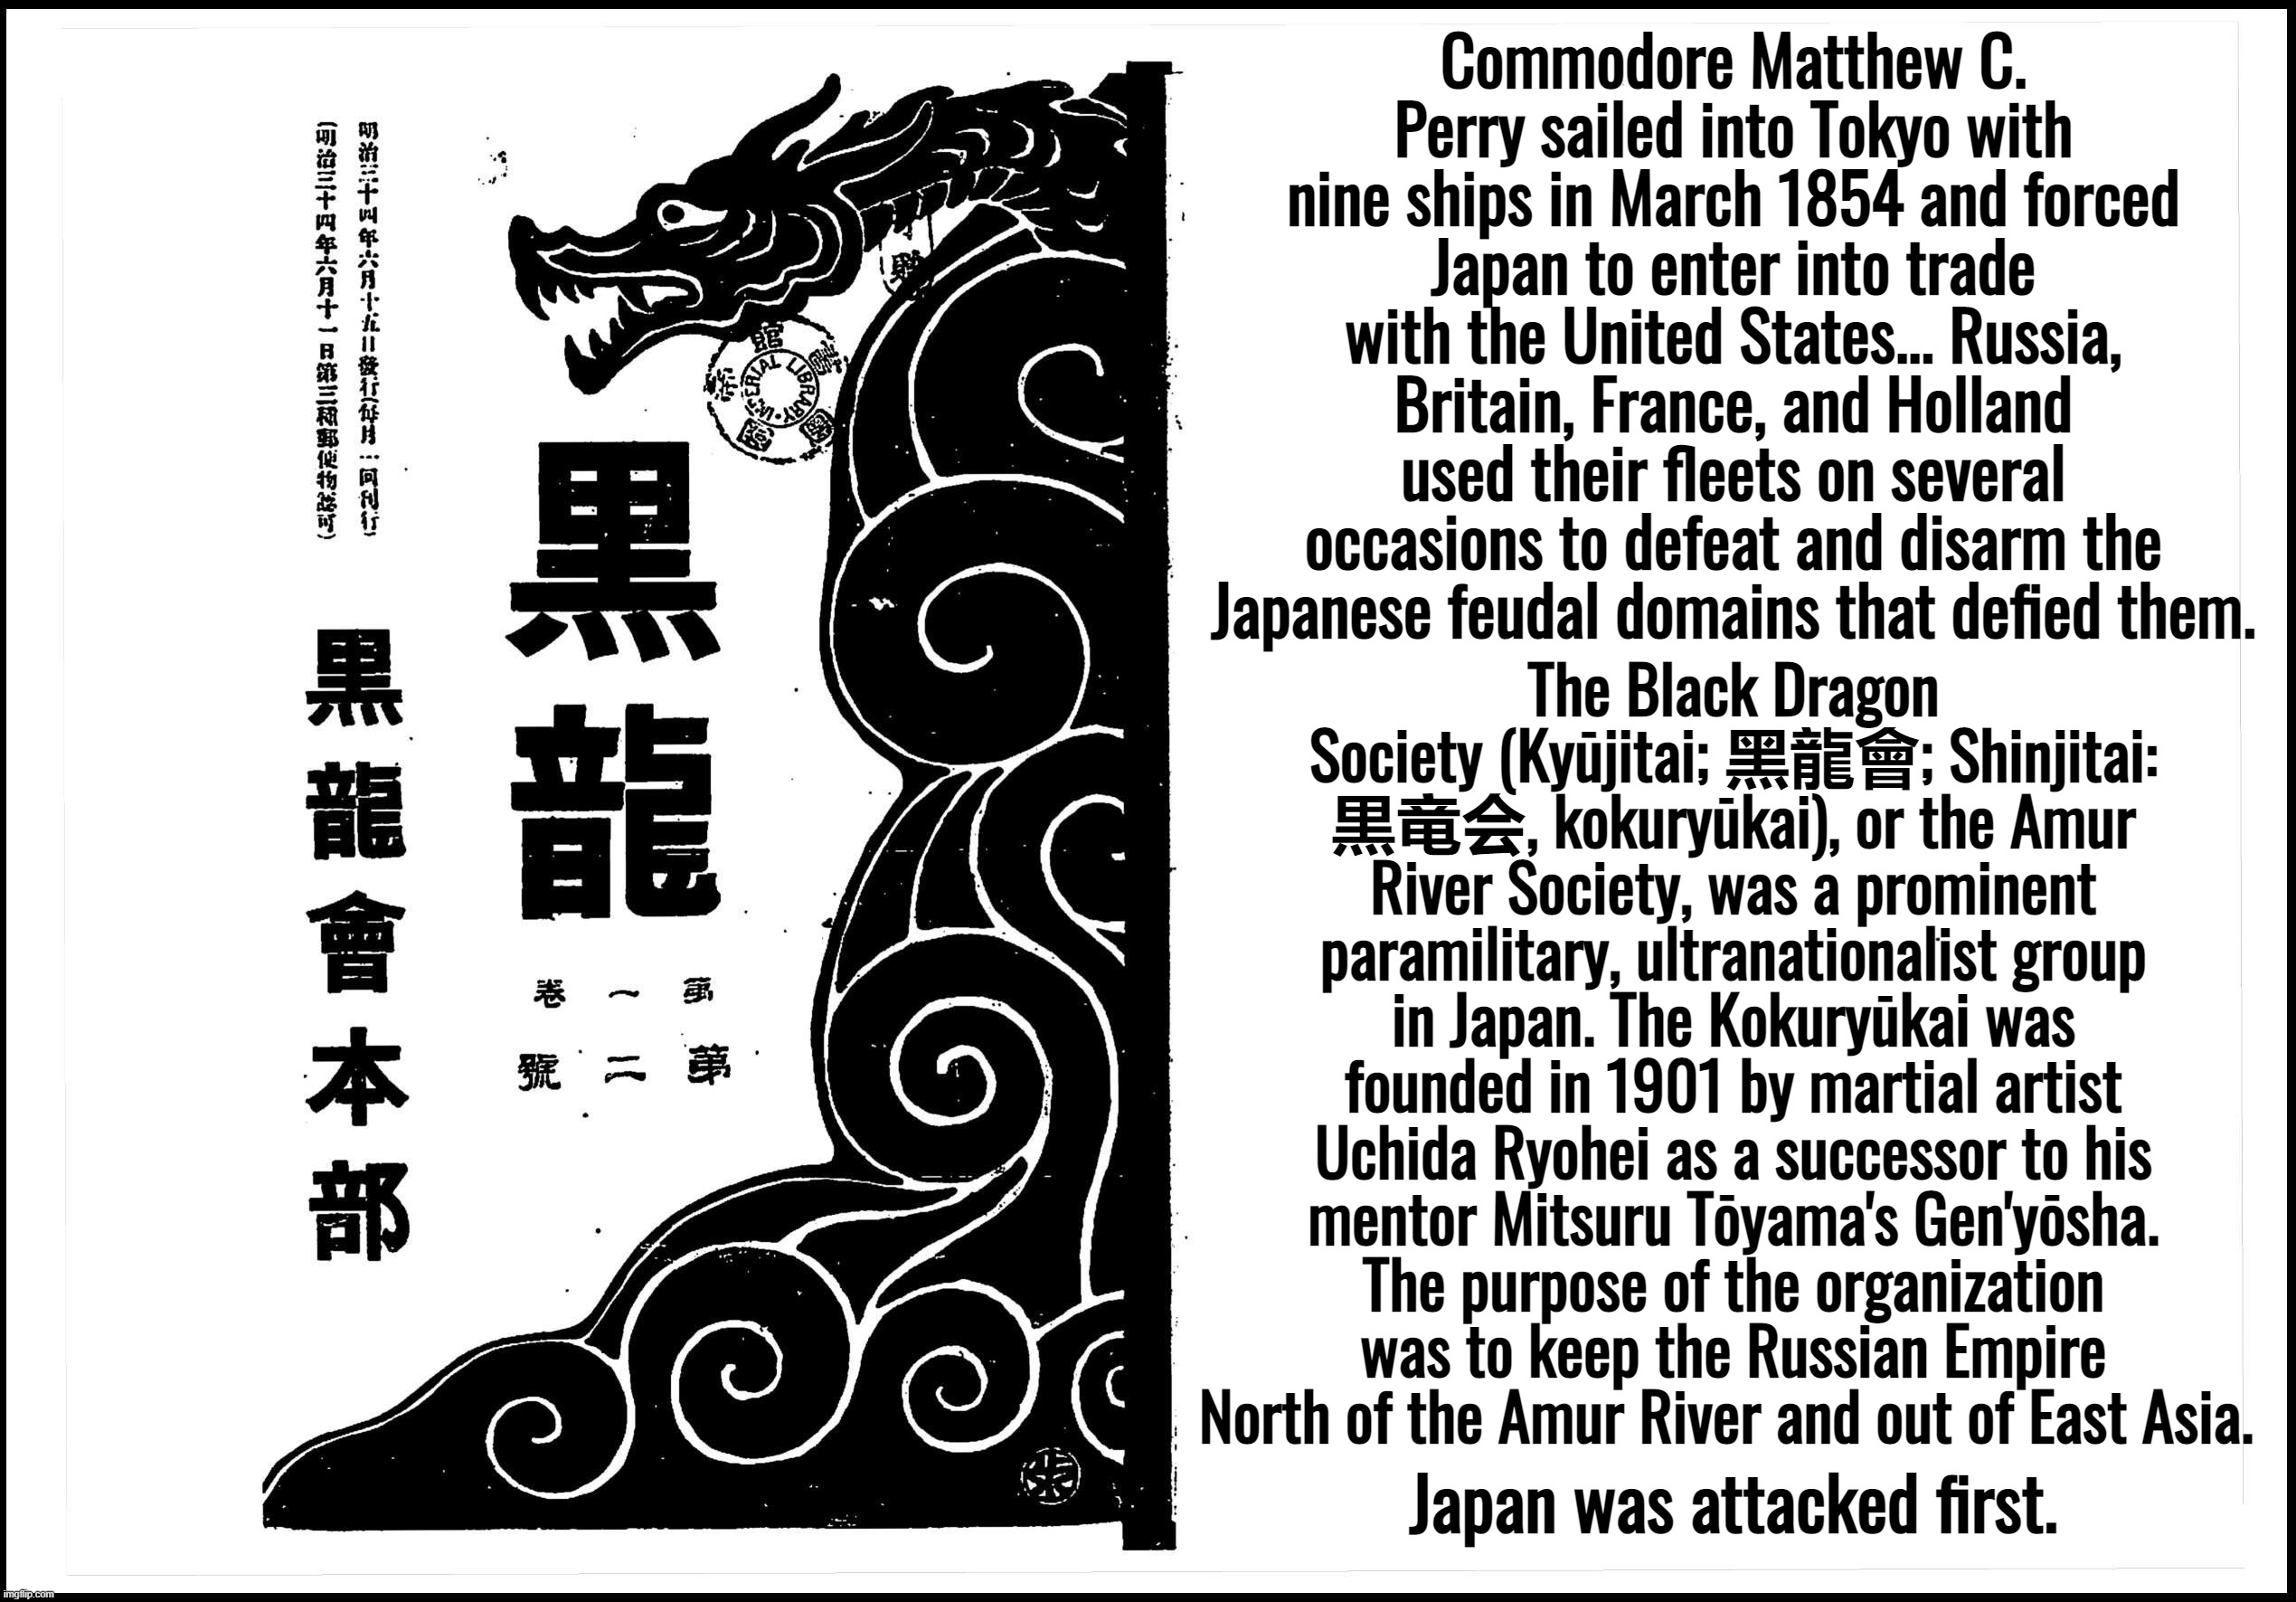 “It's a rigged system.” — Donald Trump | Commodore Matthew C. Perry sailed into Tokyo with nine ships in March 1854 and forced Japan to enter into trade with the United States... Russia, Britain, France, and Holland used their fleets on several occasions to defeat and disarm the Japanese feudal domains that defied them. The Black Dragon Society (Kyūjitai; 黑龍會; Shinjitai: 黒竜会, kokuryūkai), or the Amur River Society, was a prominent paramilitary, ultranationalist group in Japan. The Kokuryūkai was founded in 1901 by martial artist Uchida Ryohei as a successor to his mentor Mitsuru Tōyama's Gen'yōsha. The purpose of the organization was to keep the Russian Empire North of the Amur River and out of East Asia. Japan was attacked first. | image tagged in japan,ukraine,russia,nato,wwi | made w/ Imgflip meme maker